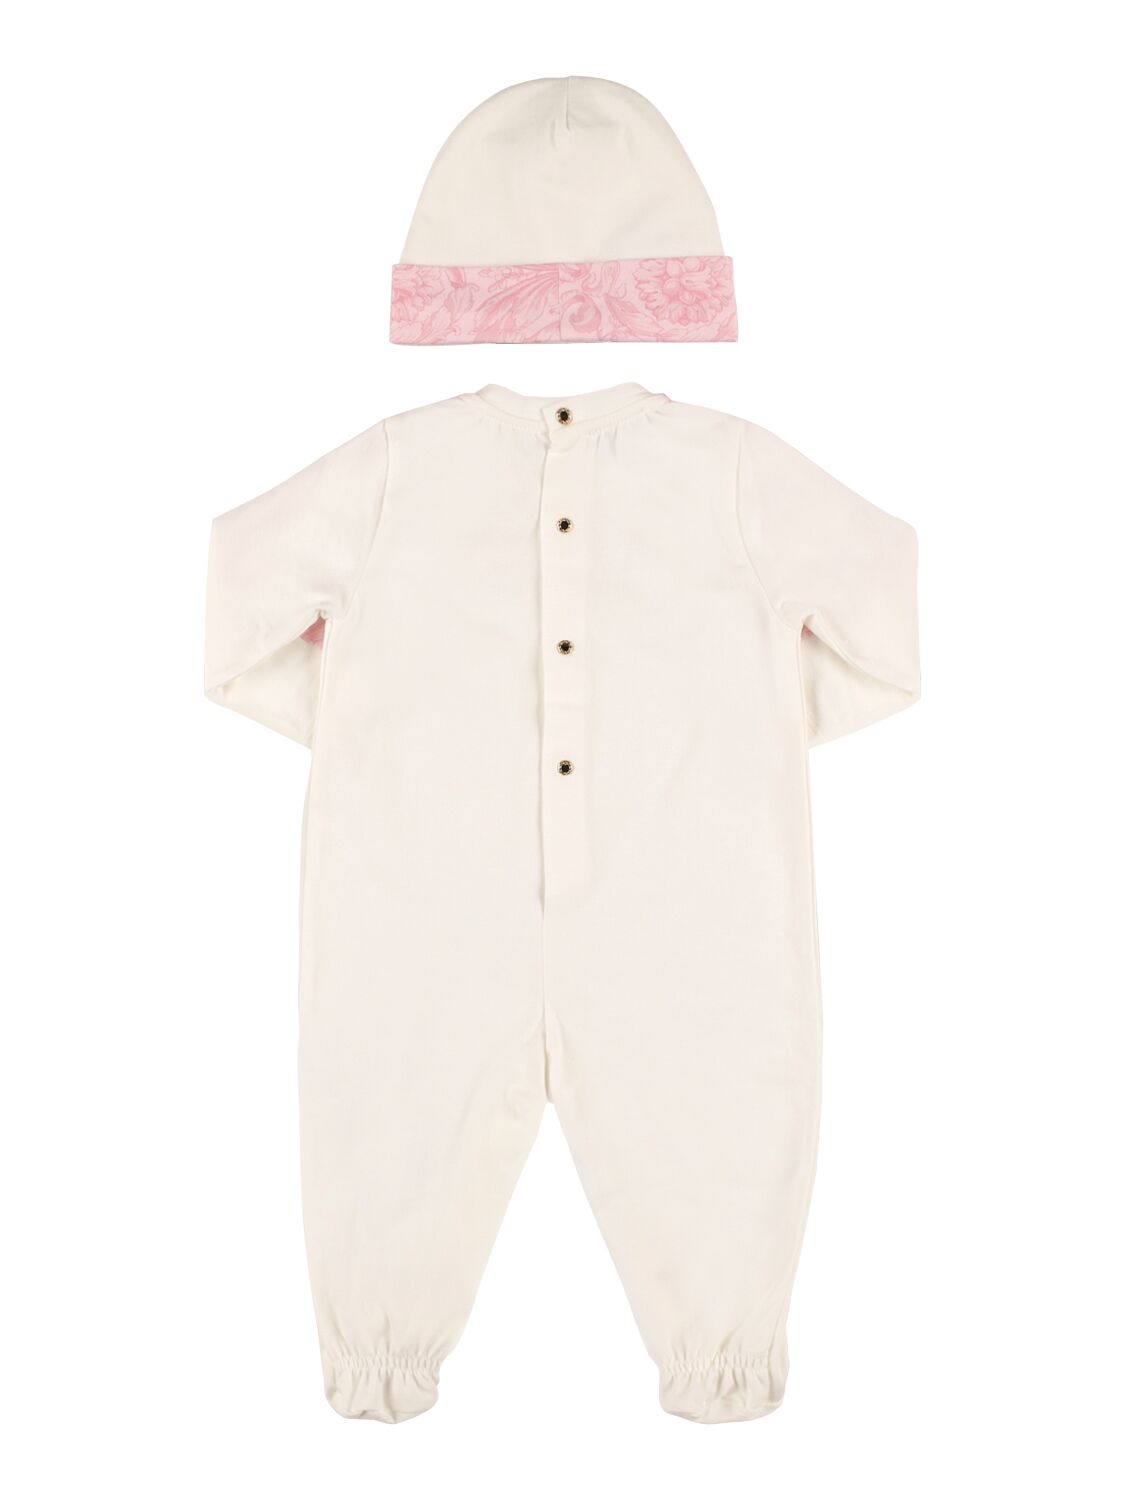 Shop Versace Printed Cotton Jersey Romper & Hat In White,pink